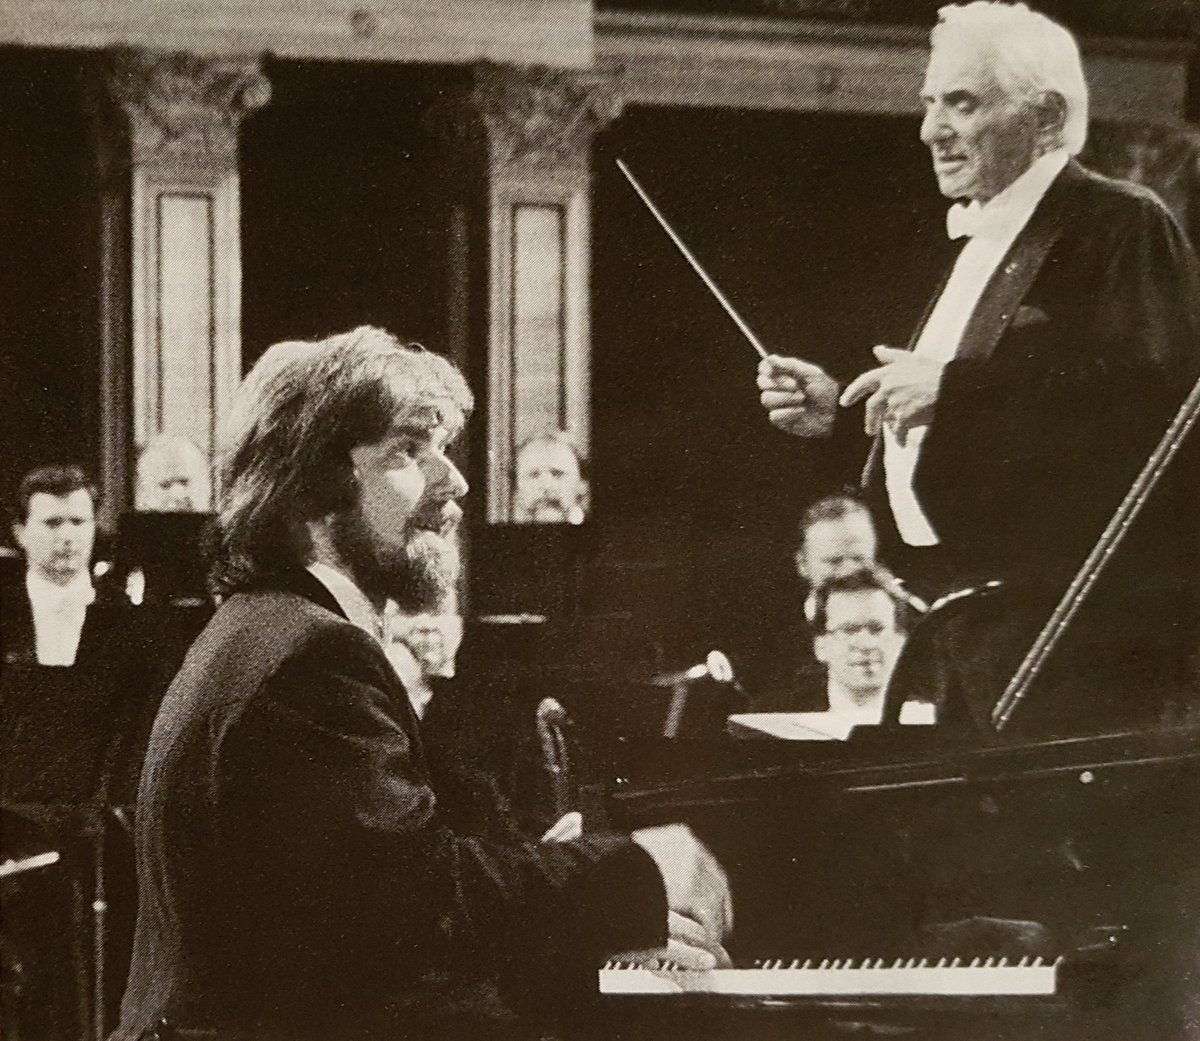 Zimerman and Bernstein at op. 58: gorgeous, brilliant, stately, pompous. Something one cannot dislike or ignore. It carries one along, delights, in an irresistible way. But it is not among my greatest favourites. >